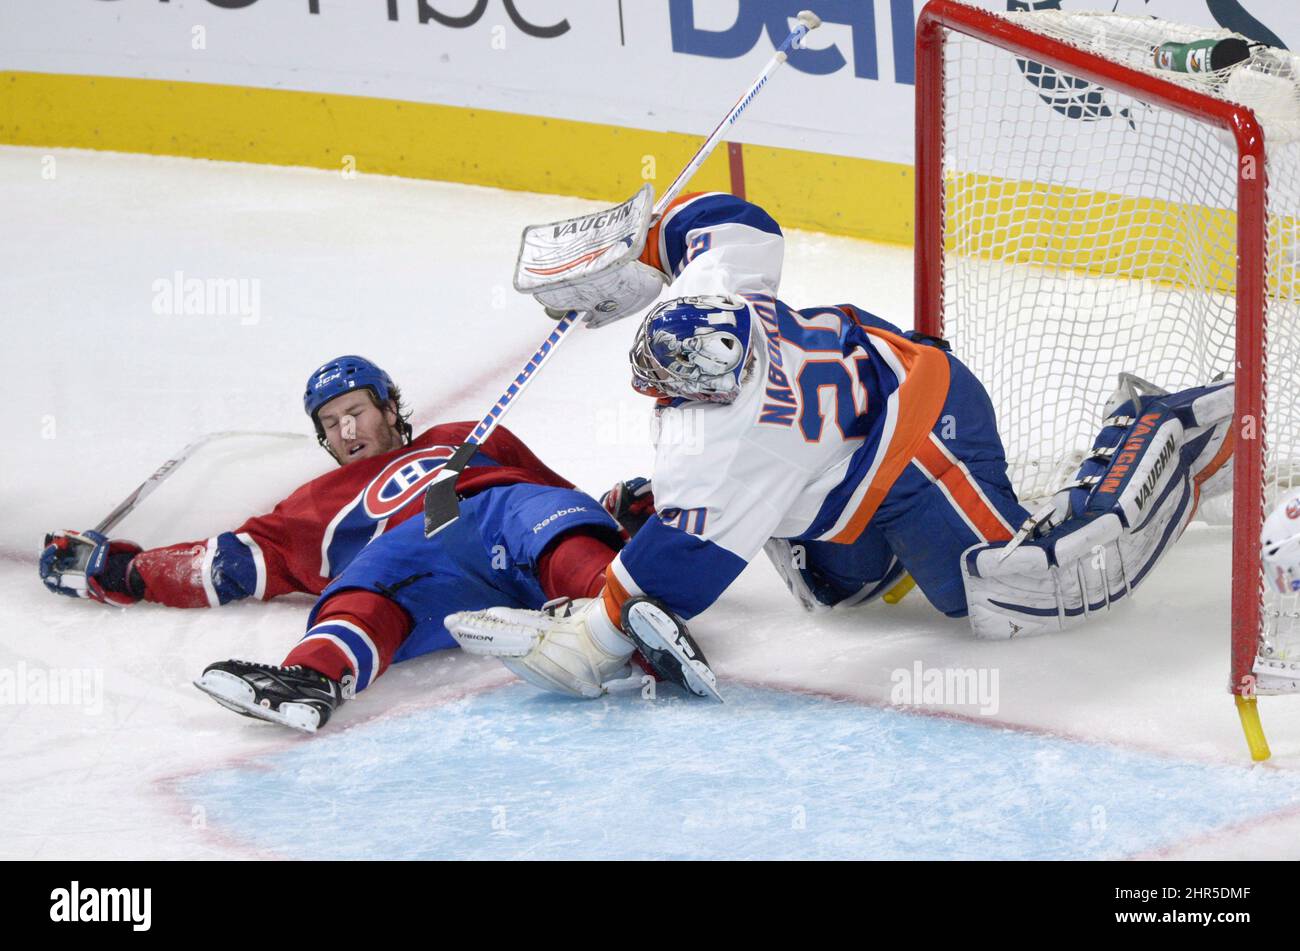 Montreal Canadiens' Brandon Prust, left, collides with New York Islanders goaltender Evgeni Nabokov during second period NHL hockey action in Montreal, Thursday, February 21, 2013. THE CANADIAN PRESS /Graham Hughes. Stock Photo